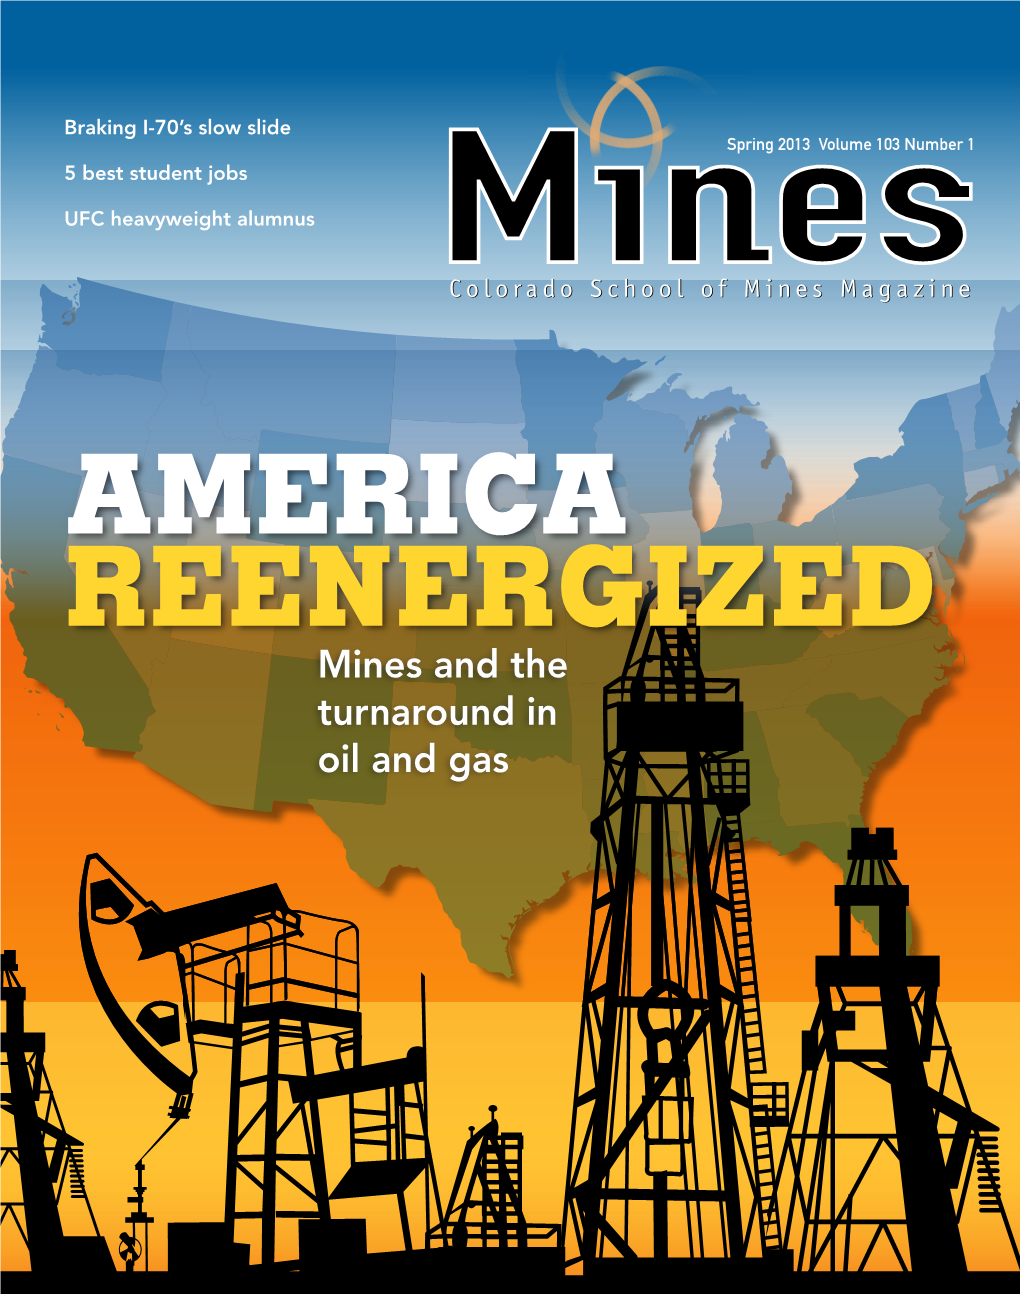 America Reenergized Mines and the Turnaroundcolorado in School of Mines Magazine Oil and Gas